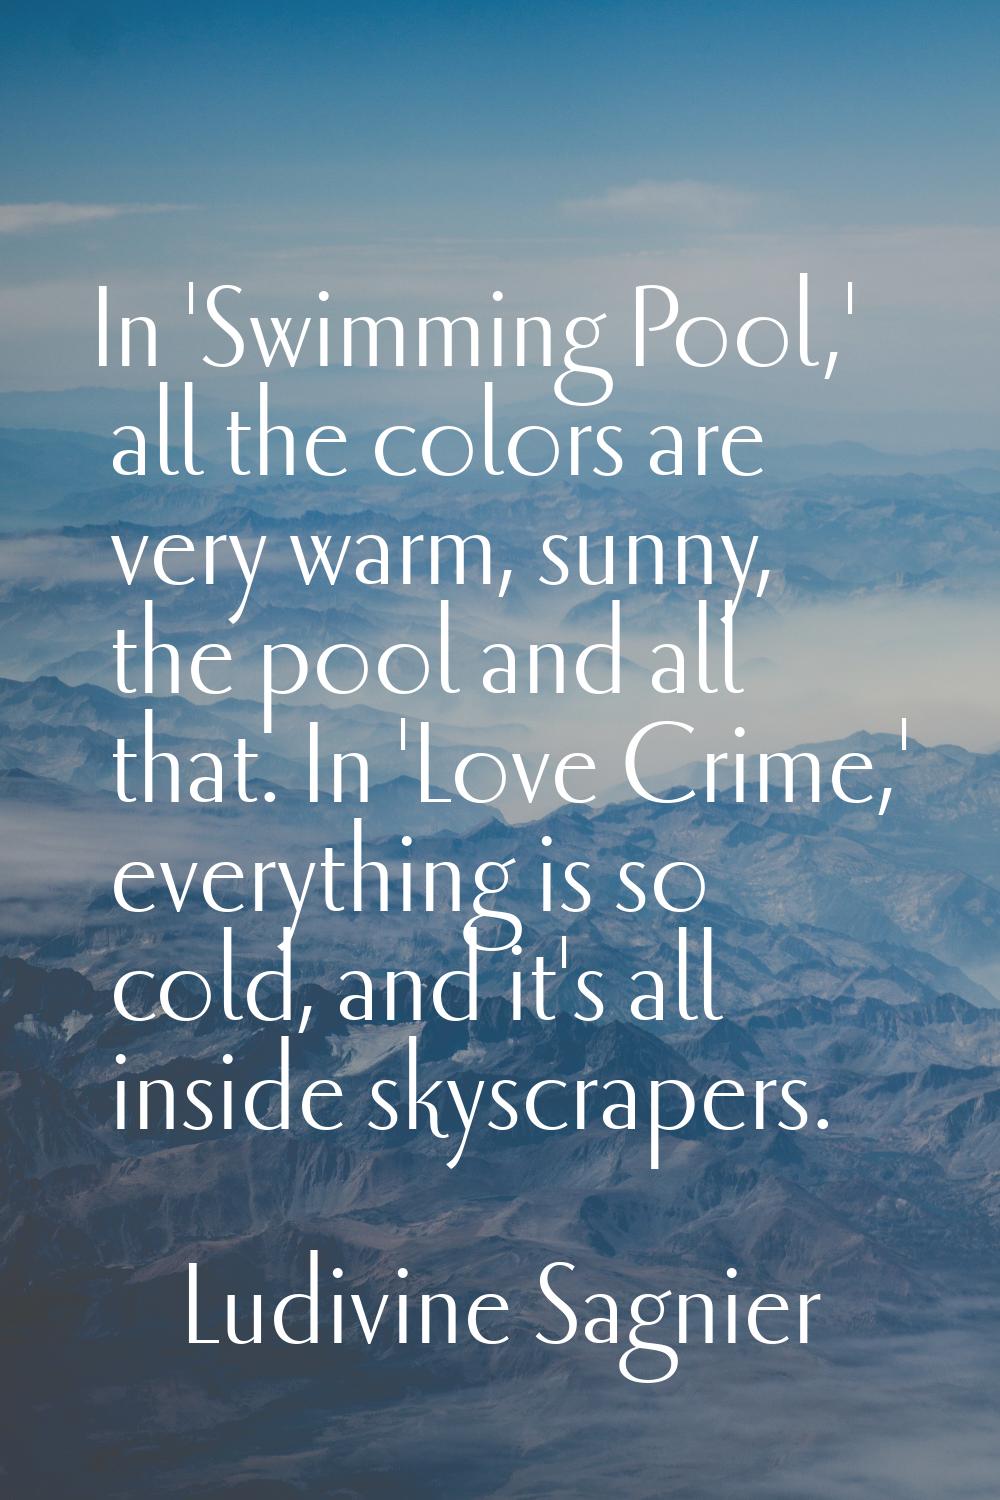 In 'Swimming Pool,' all the colors are very warm, sunny, the pool and all that. In 'Love Crime,' ev